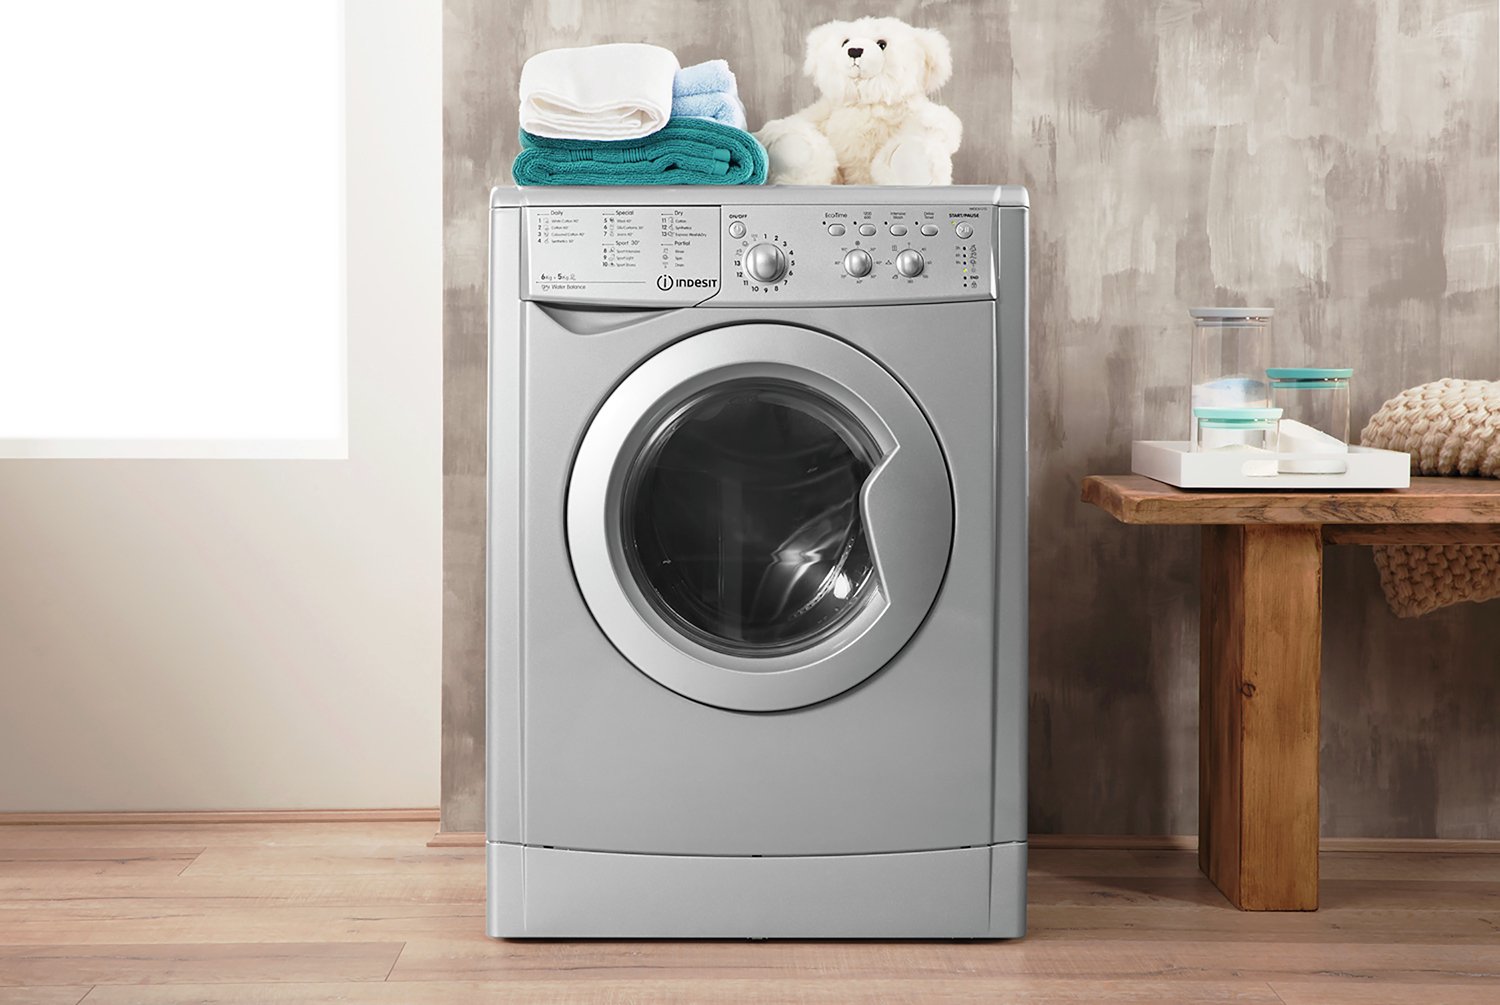 Indesit IWDC6125S 6KG / 5KG 1200 Spin Washer Dryer Review